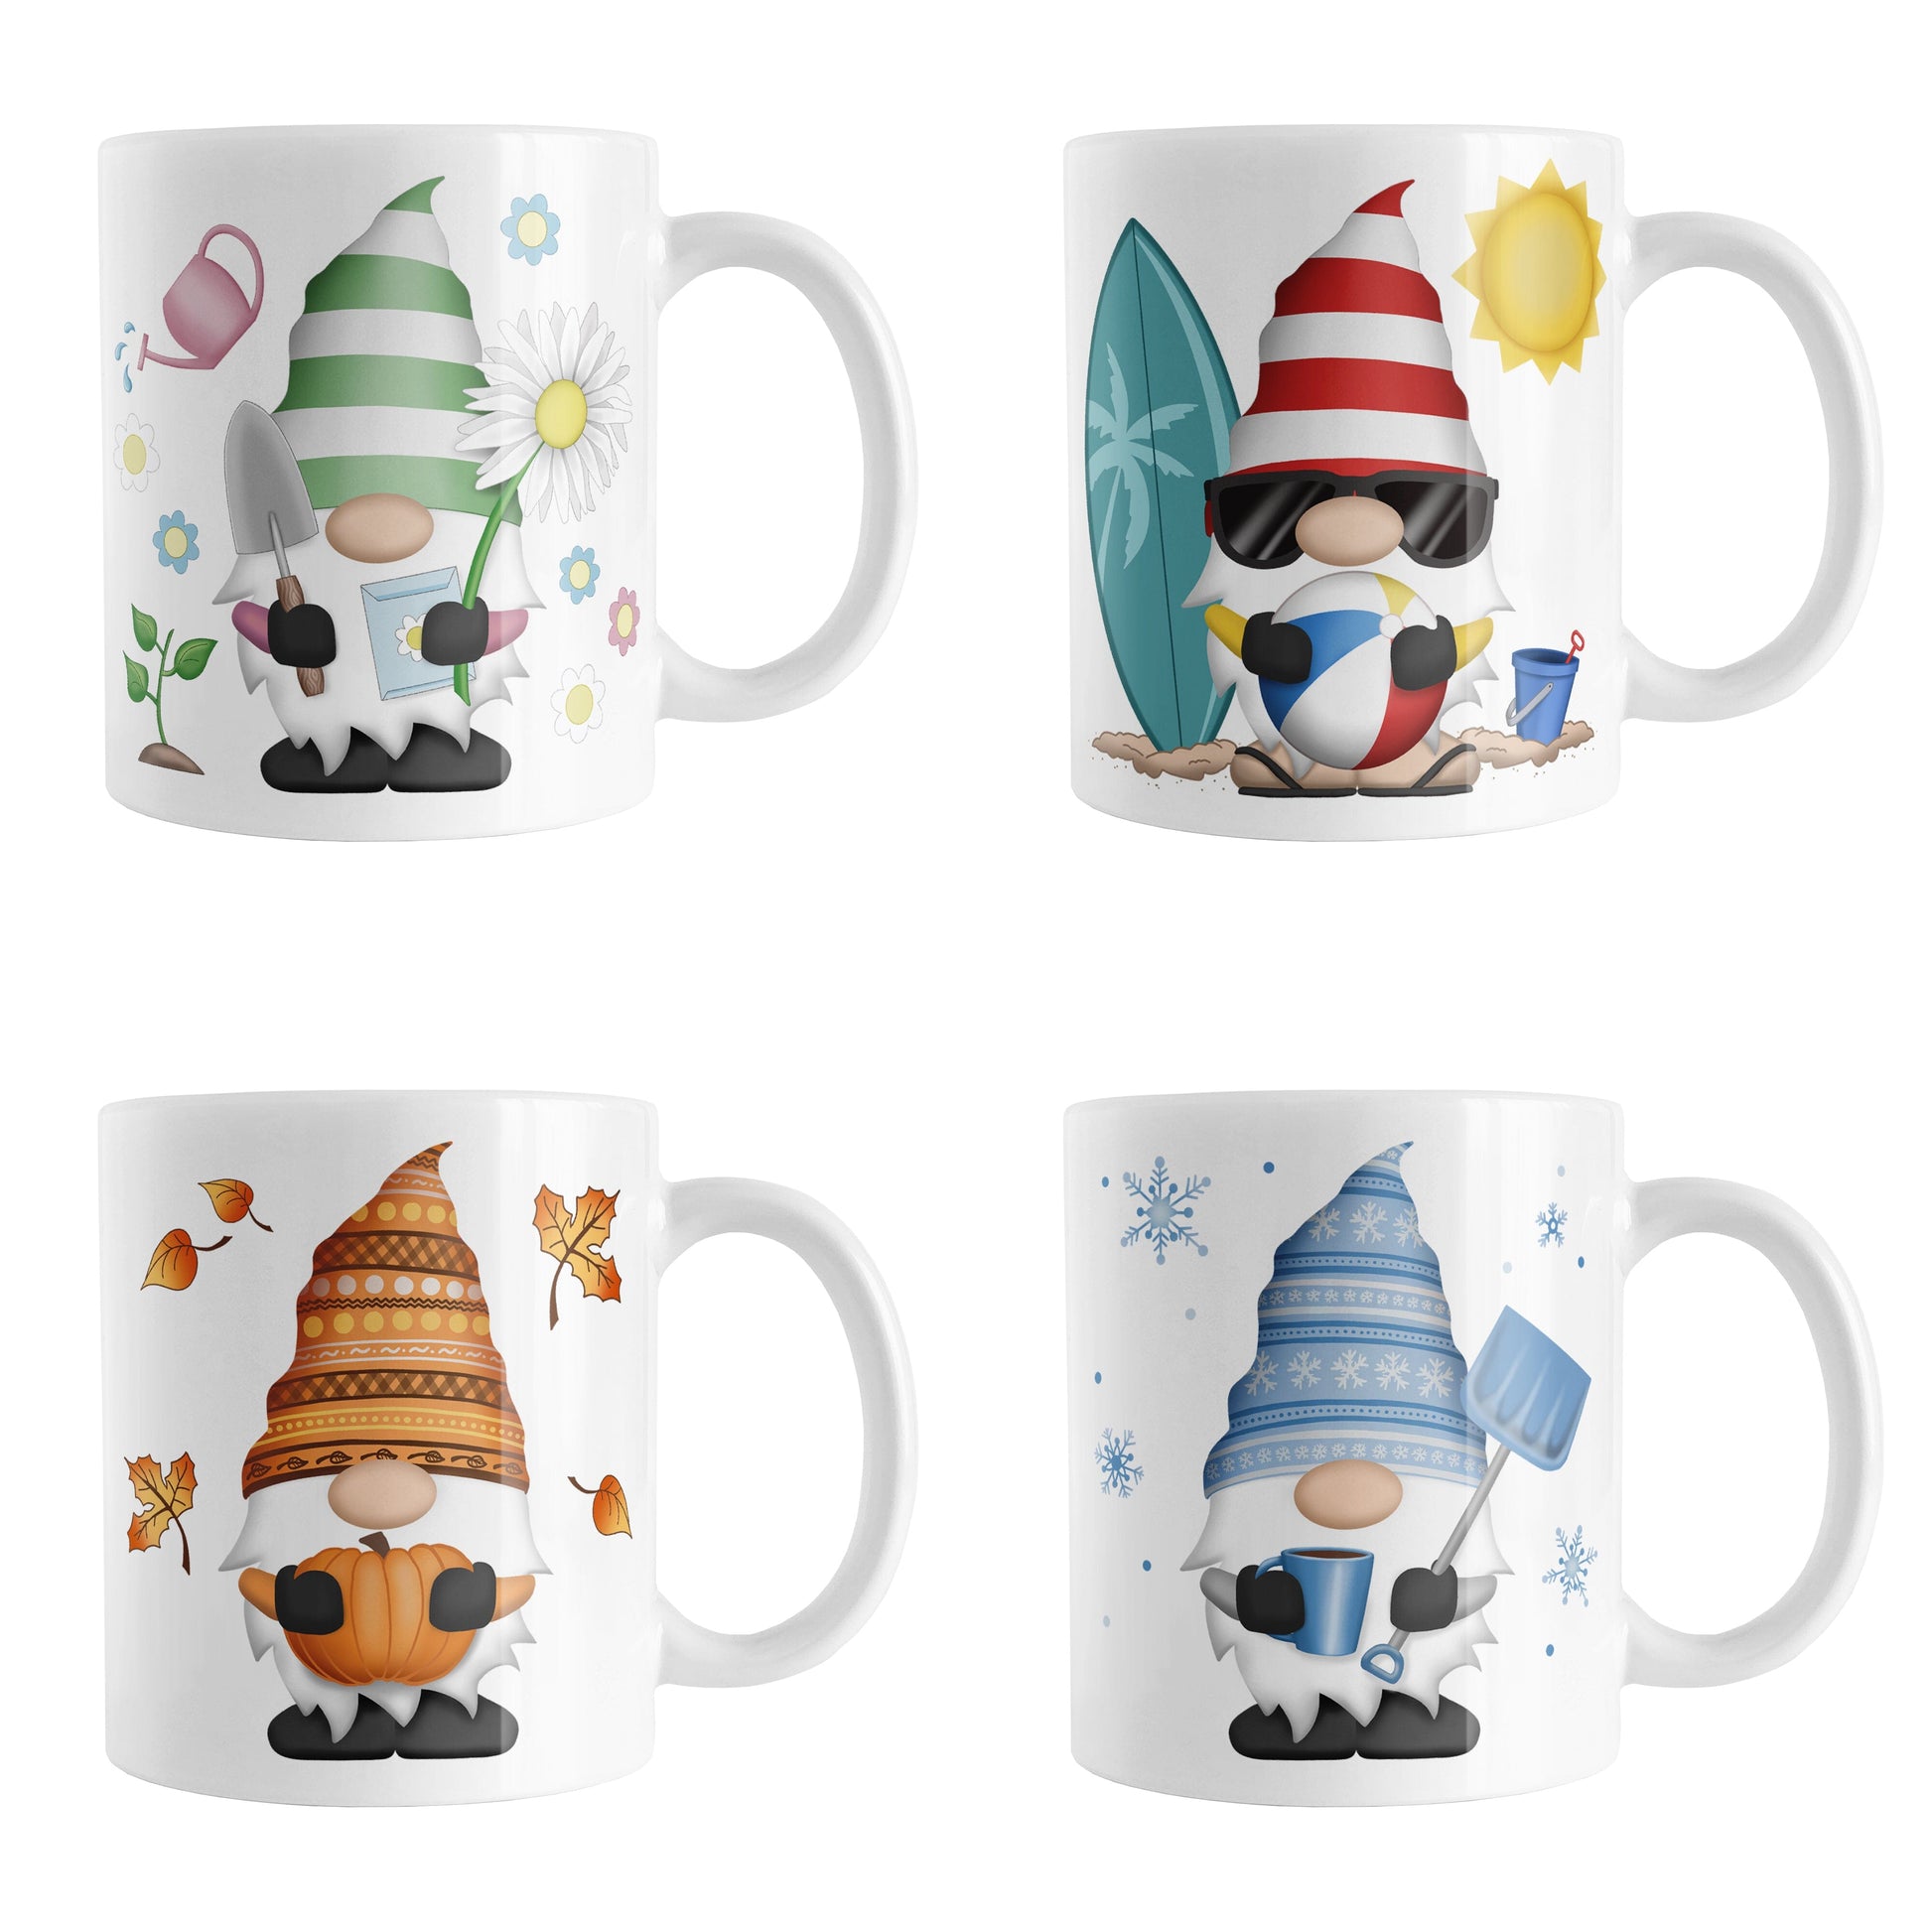 Set of 4 Seasonal Gnome Mugs (11oz) designed and illustrated with different seasonal themes including spring, summer, fall, and winter. Gnome mug gift set.